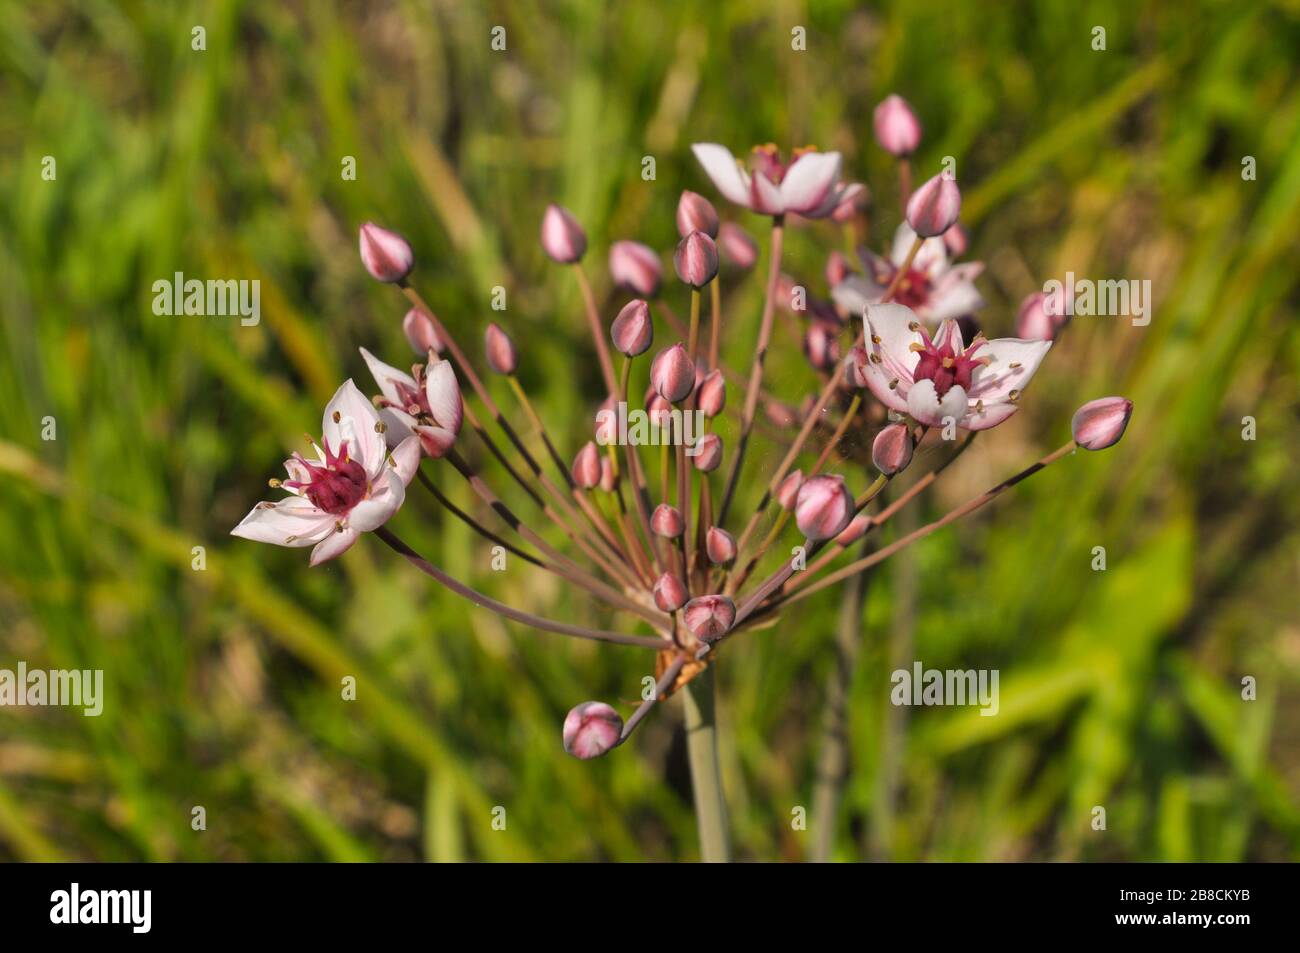 Closeup of blossoming butomus umbellatus wildflower. Common names include flowering rush or grass rush. Stock Photo